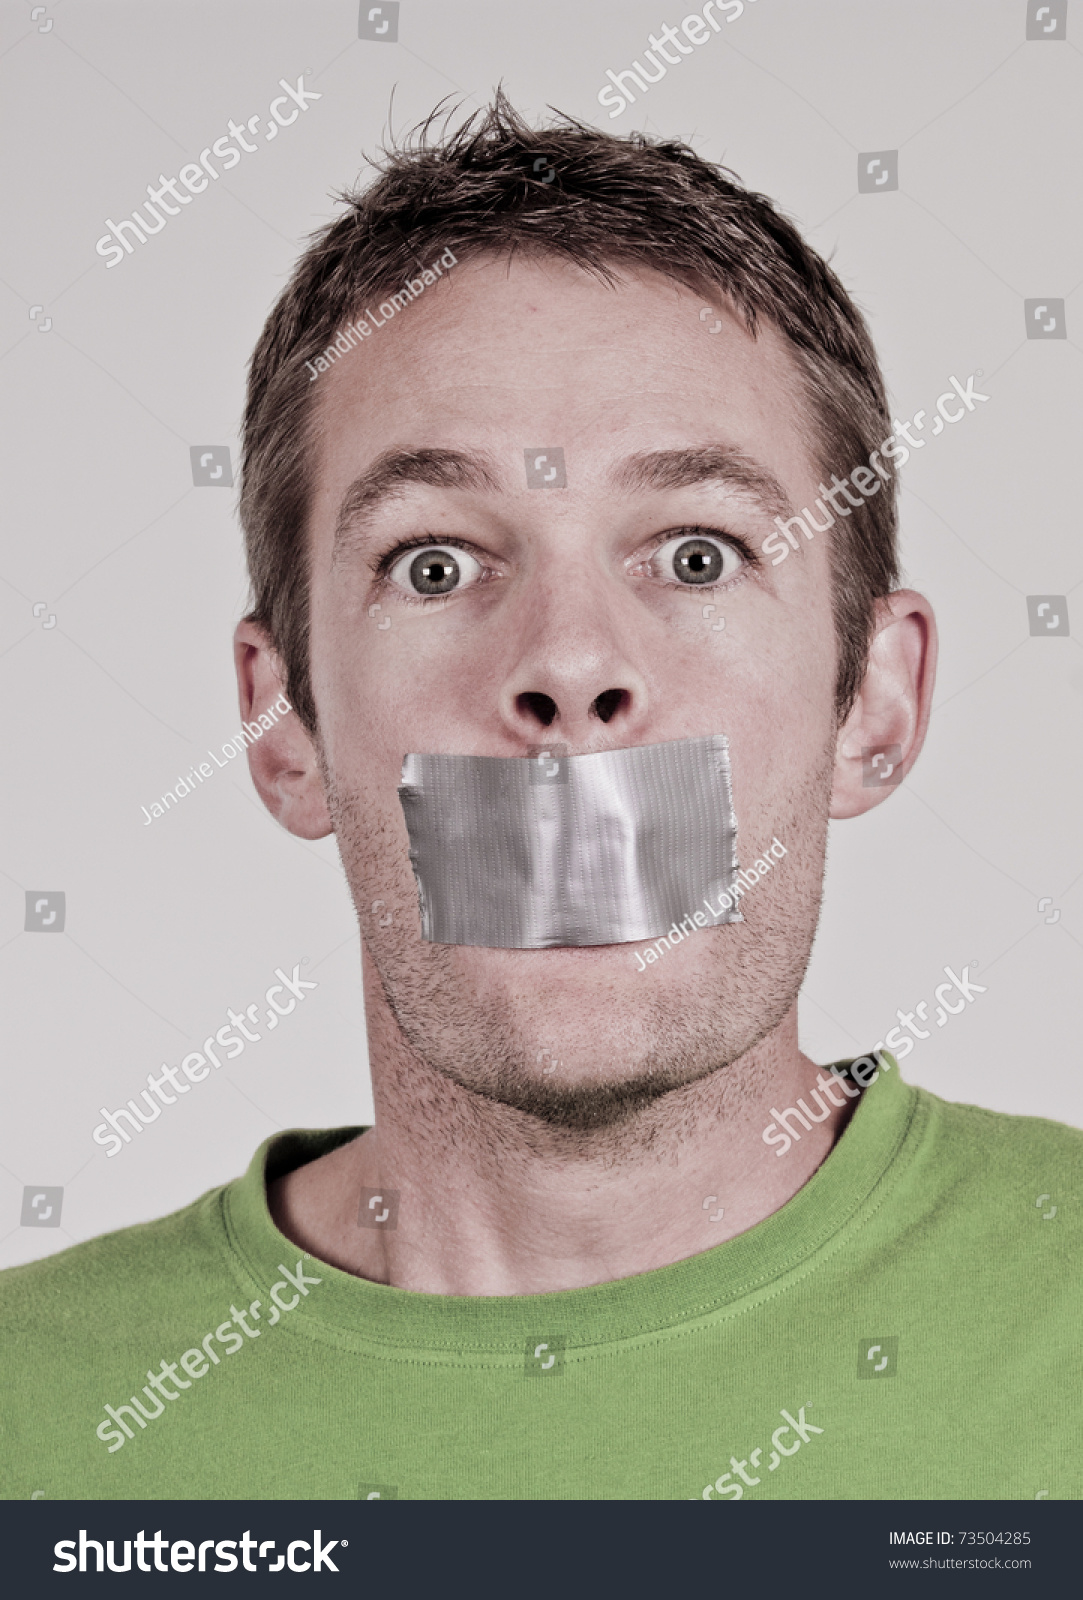 Man Tape Over His Mouth Stock Photo 73504285 - Shutterstock